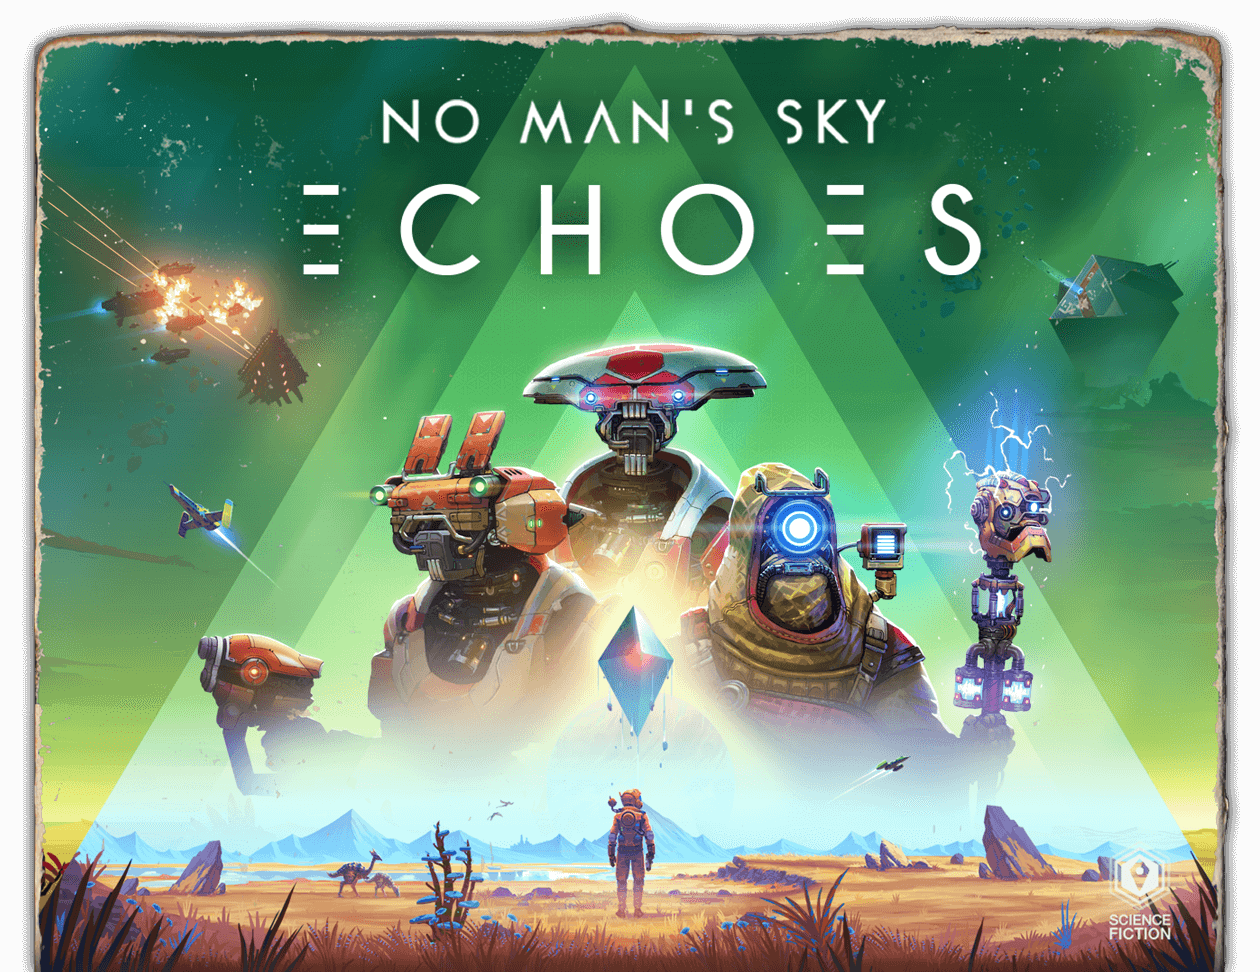 NMS Echoes release